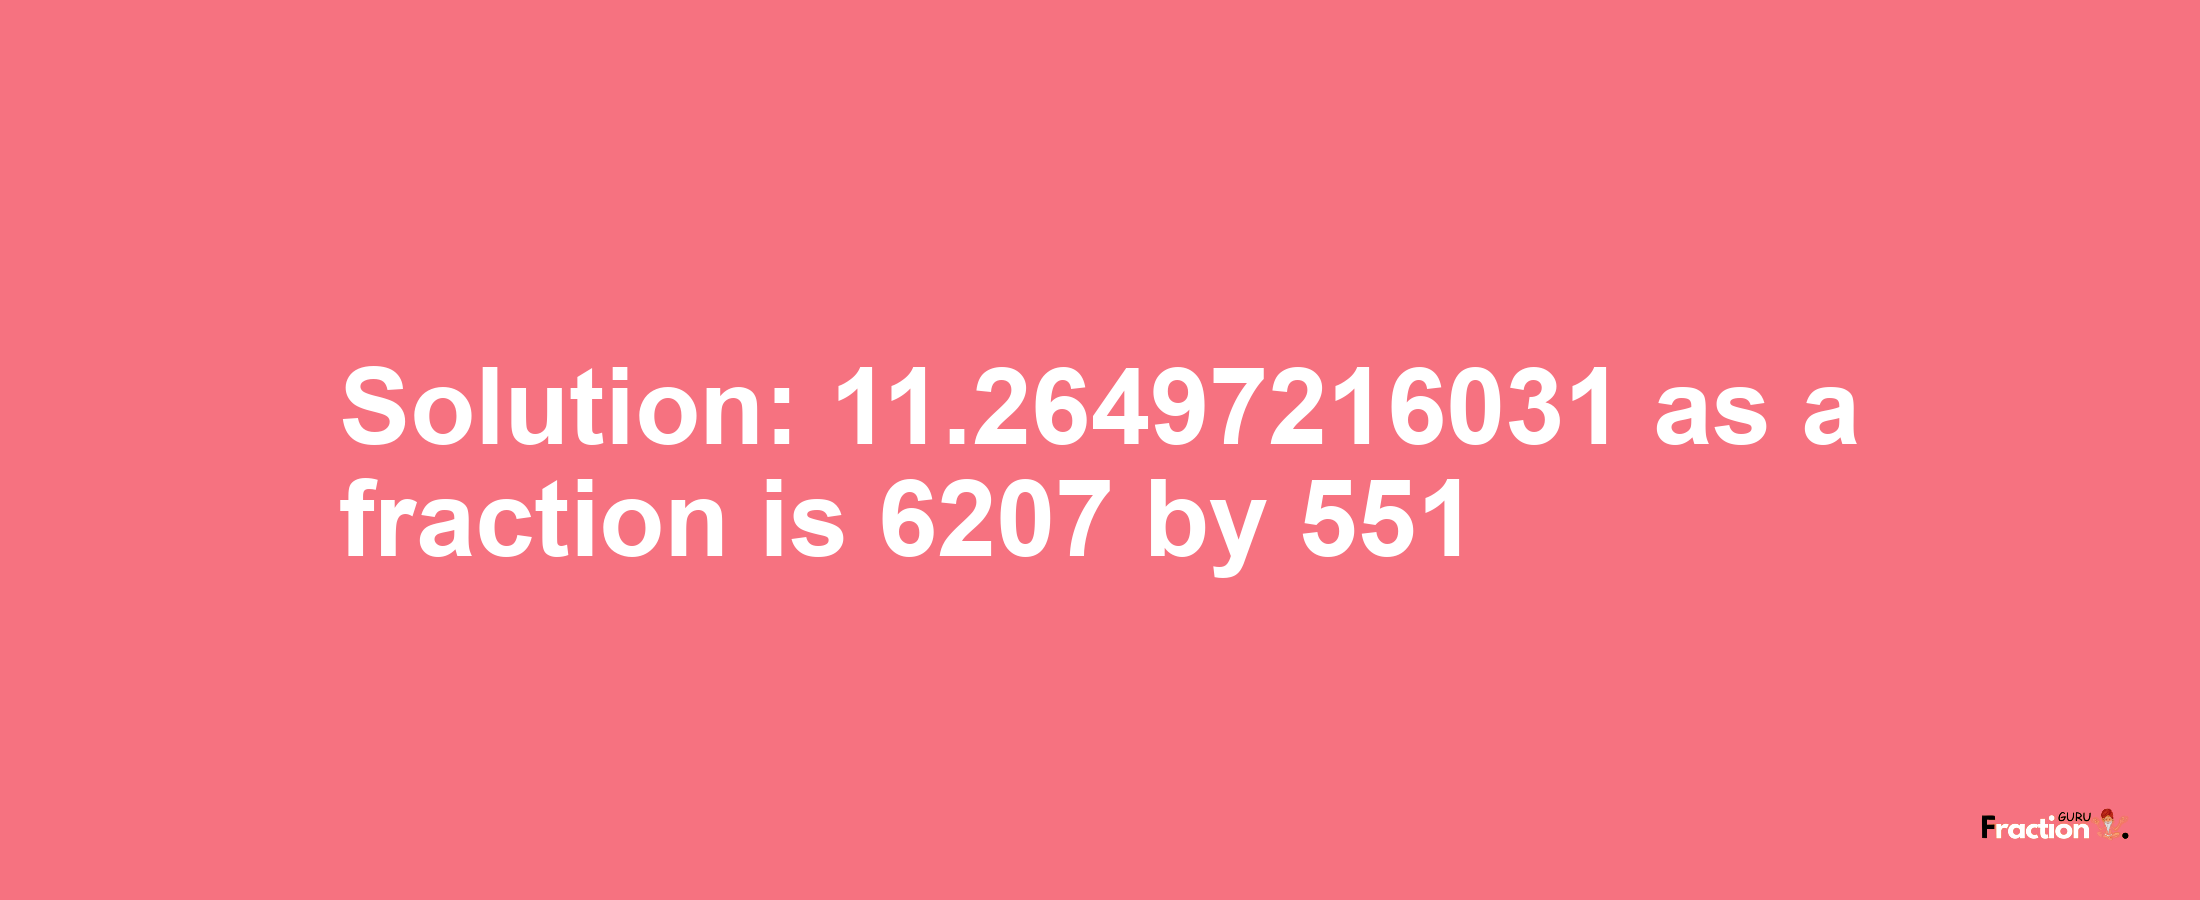 Solution:11.26497216031 as a fraction is 6207/551